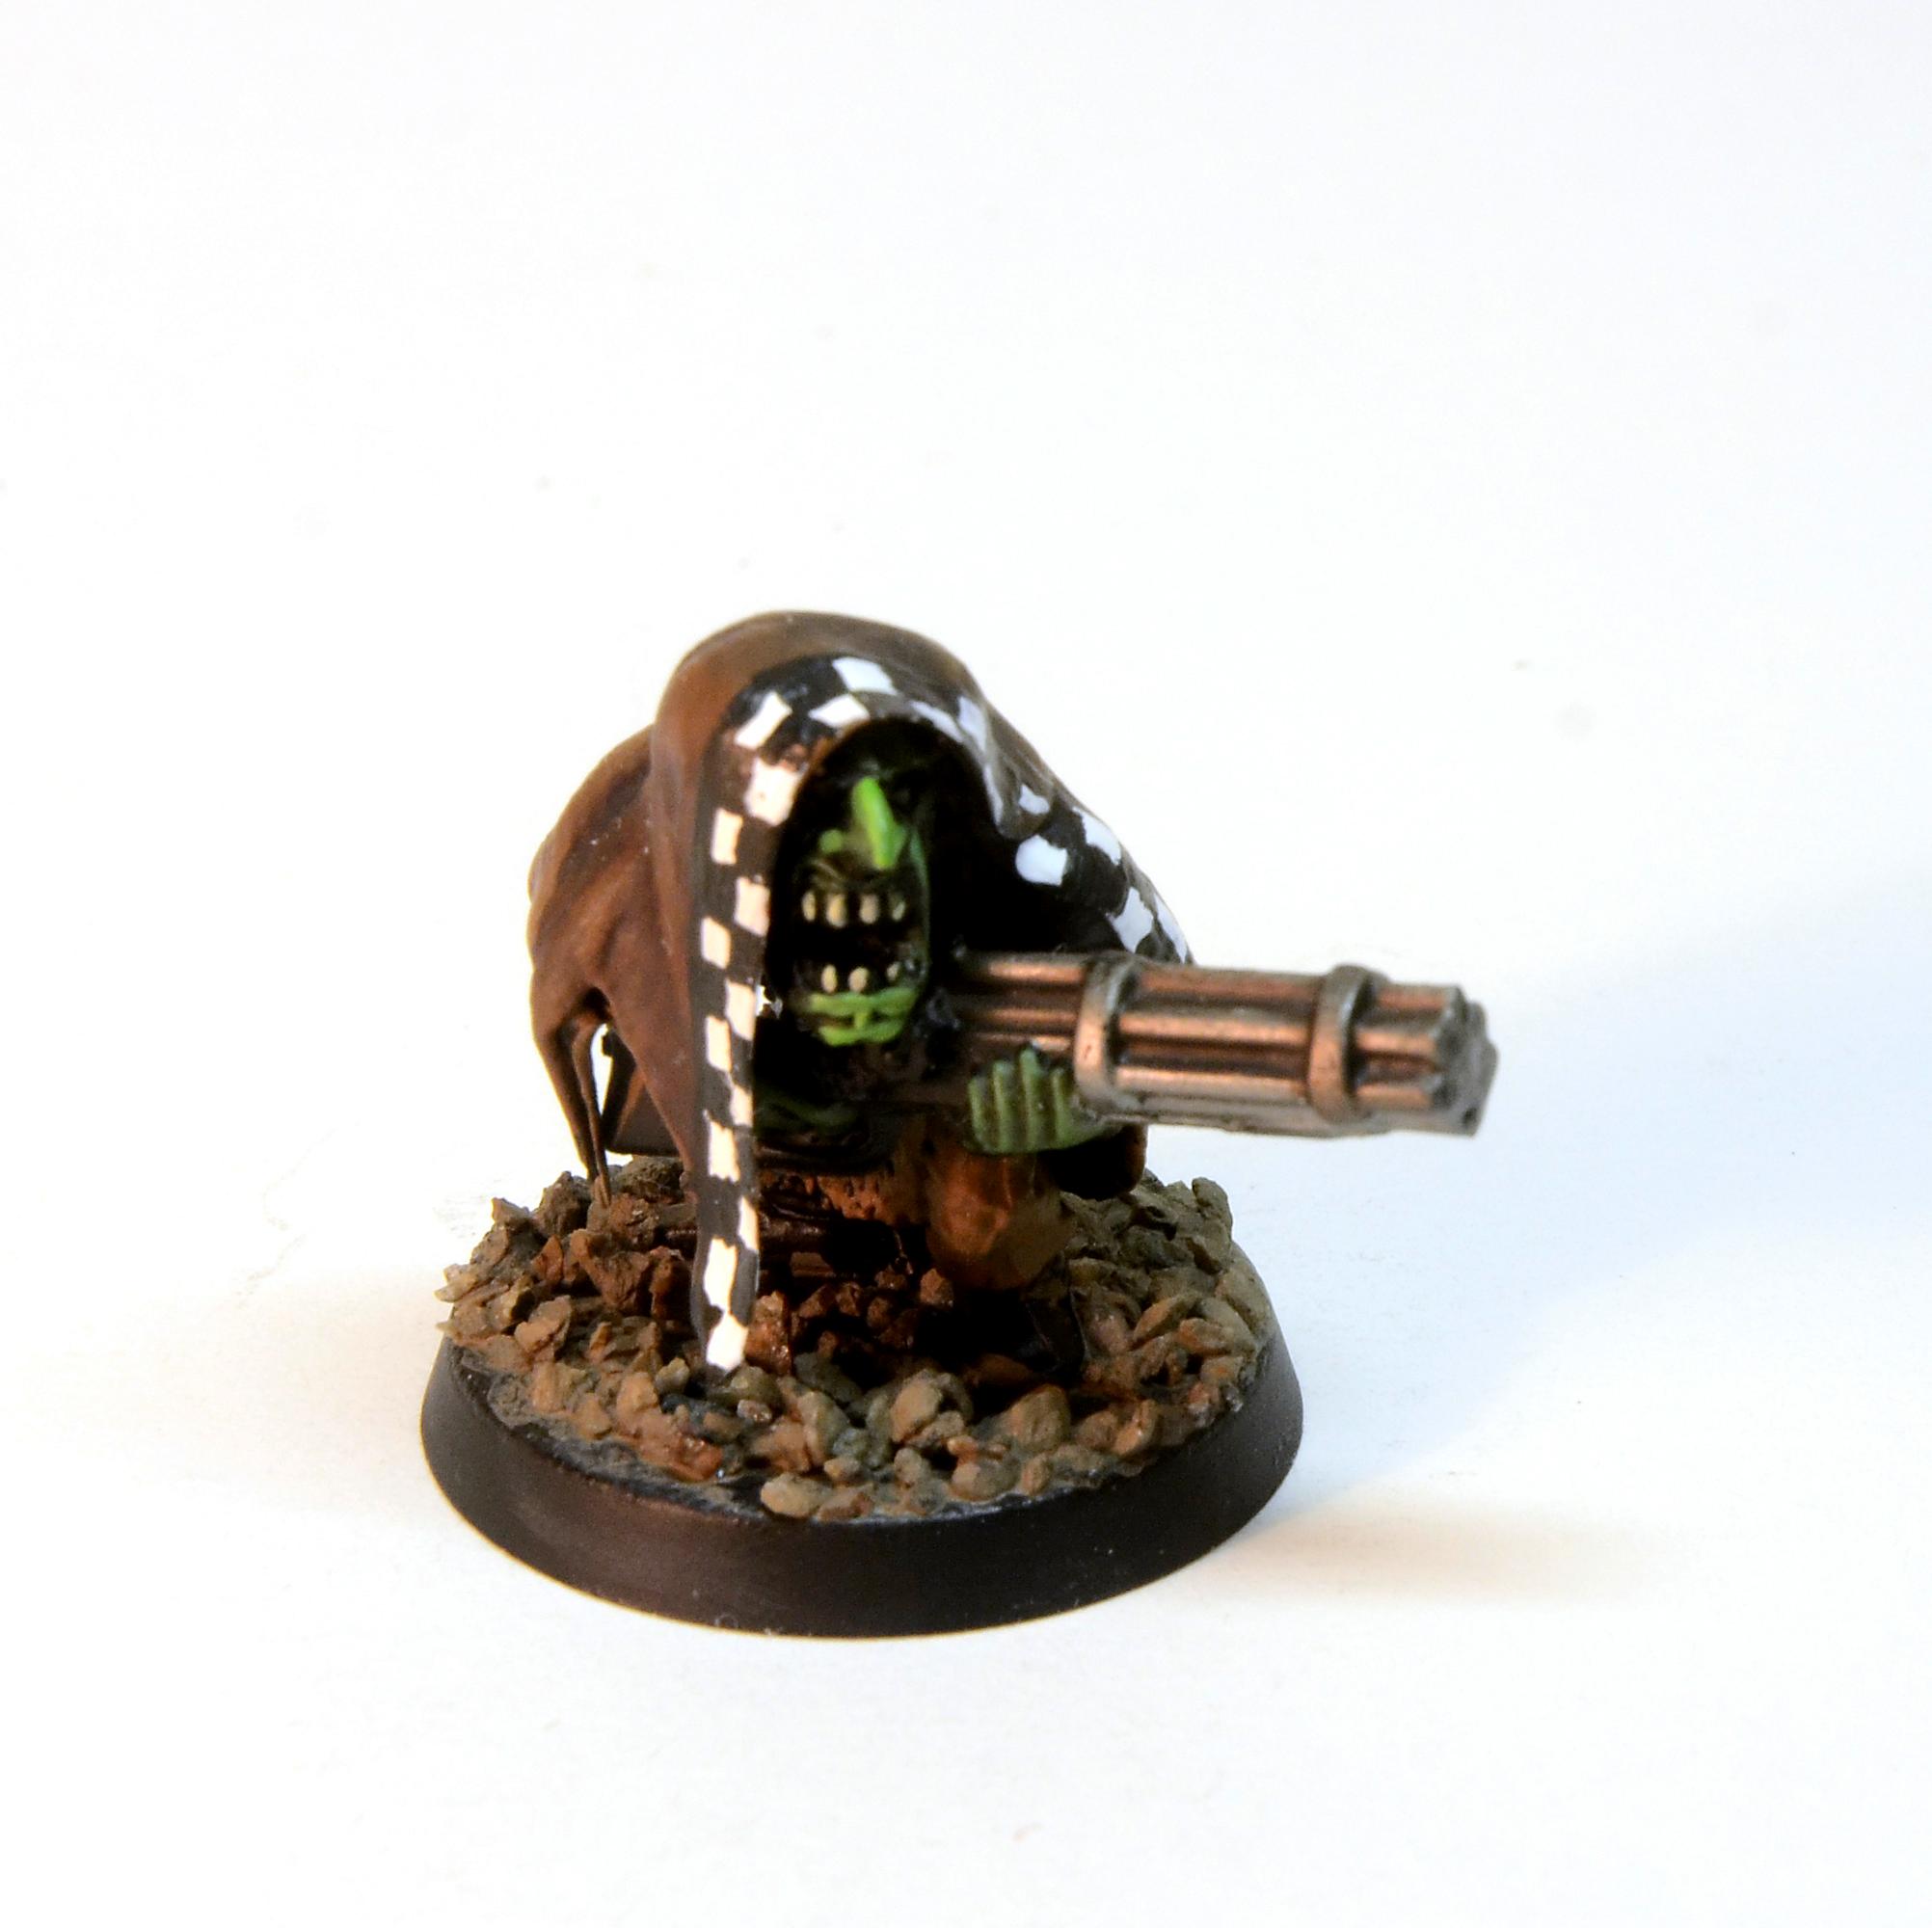 Conversion, Gretchin, Grots, Orks